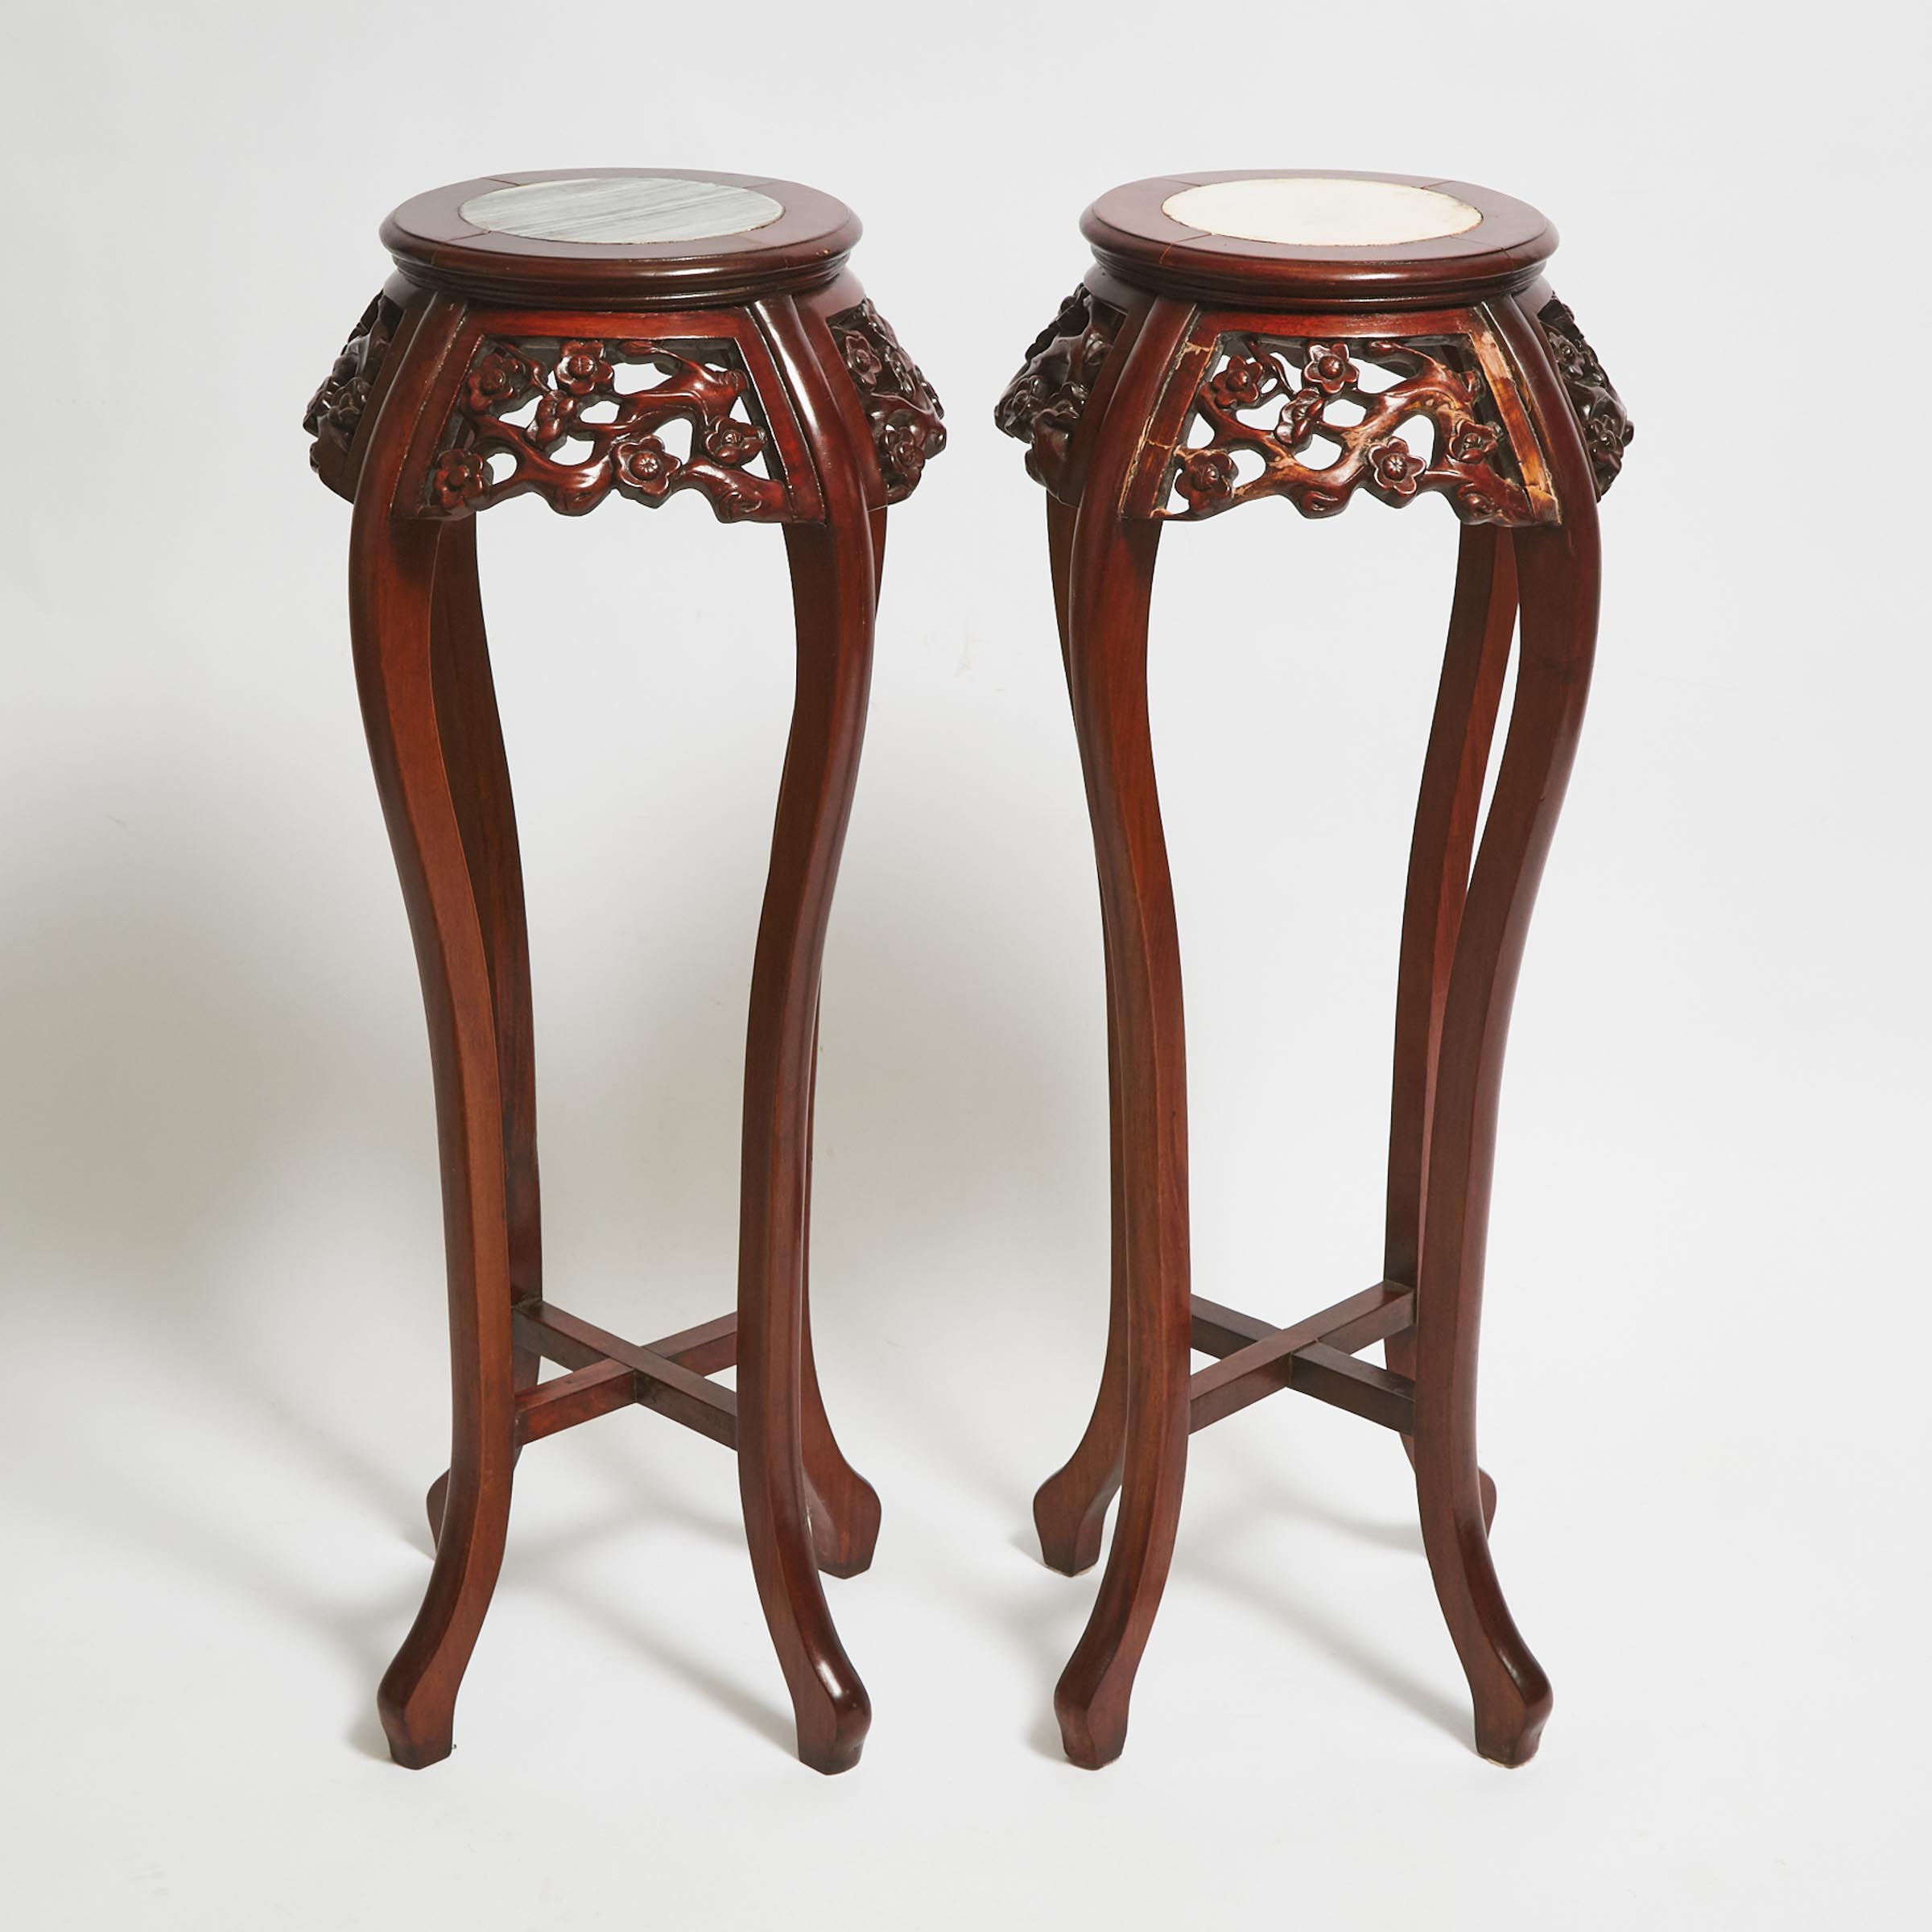 A Pair of Chinese Marble-Inset Wood Stands, Mid 20th Century